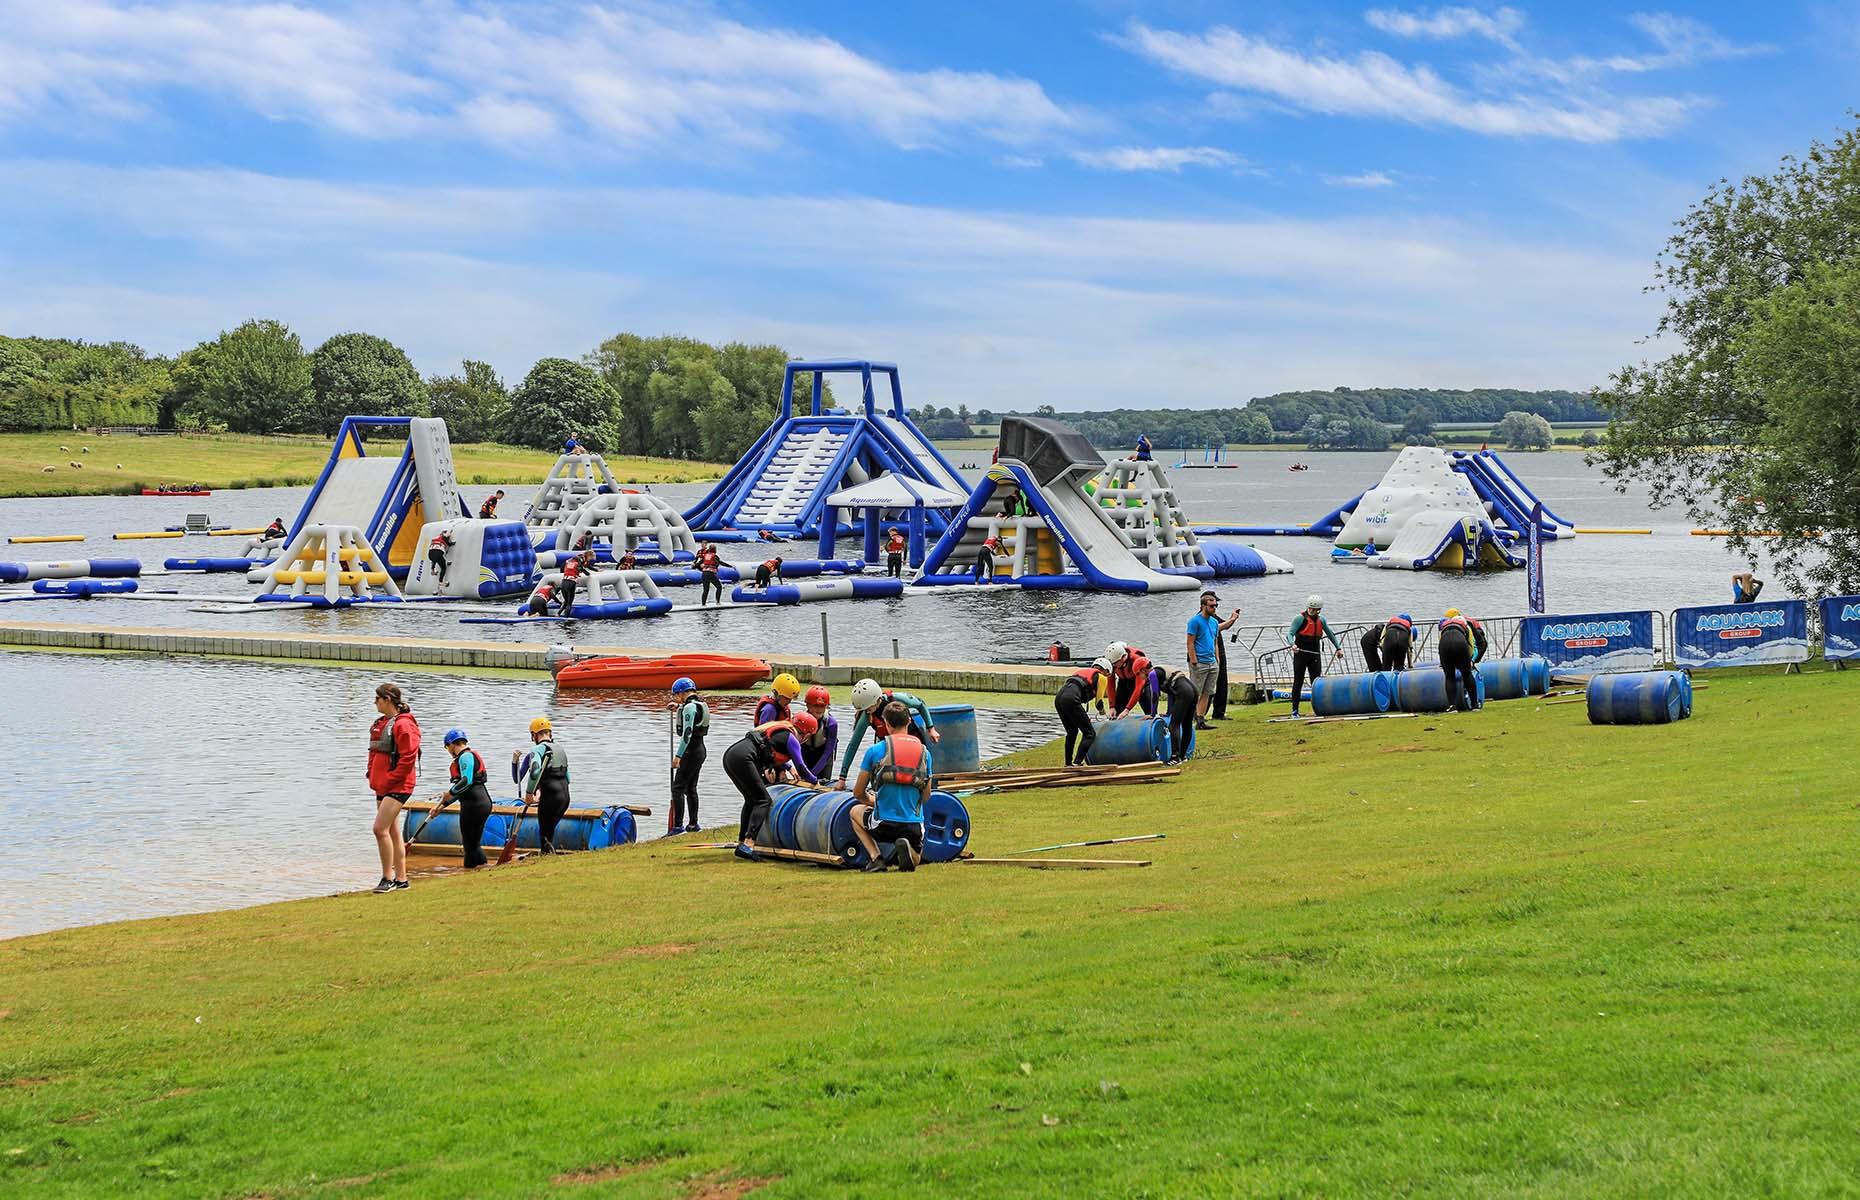 <p>Slightly different to your average water park, this attraction in Rutland lays claim to being <a href="https://aquaparkgroup.co.uk/rutland/">the UK's largest inflatable water park</a>. And it all looks like serious fun. Set on the north shore of Rutland Water Park, the 330-foot (92m) by 260-foot (80m) inflatable course includes climbing walls, trampolines, balance bars, rockers, rollers, blast bags, and slides. Do you dare take on the challenge? </p>